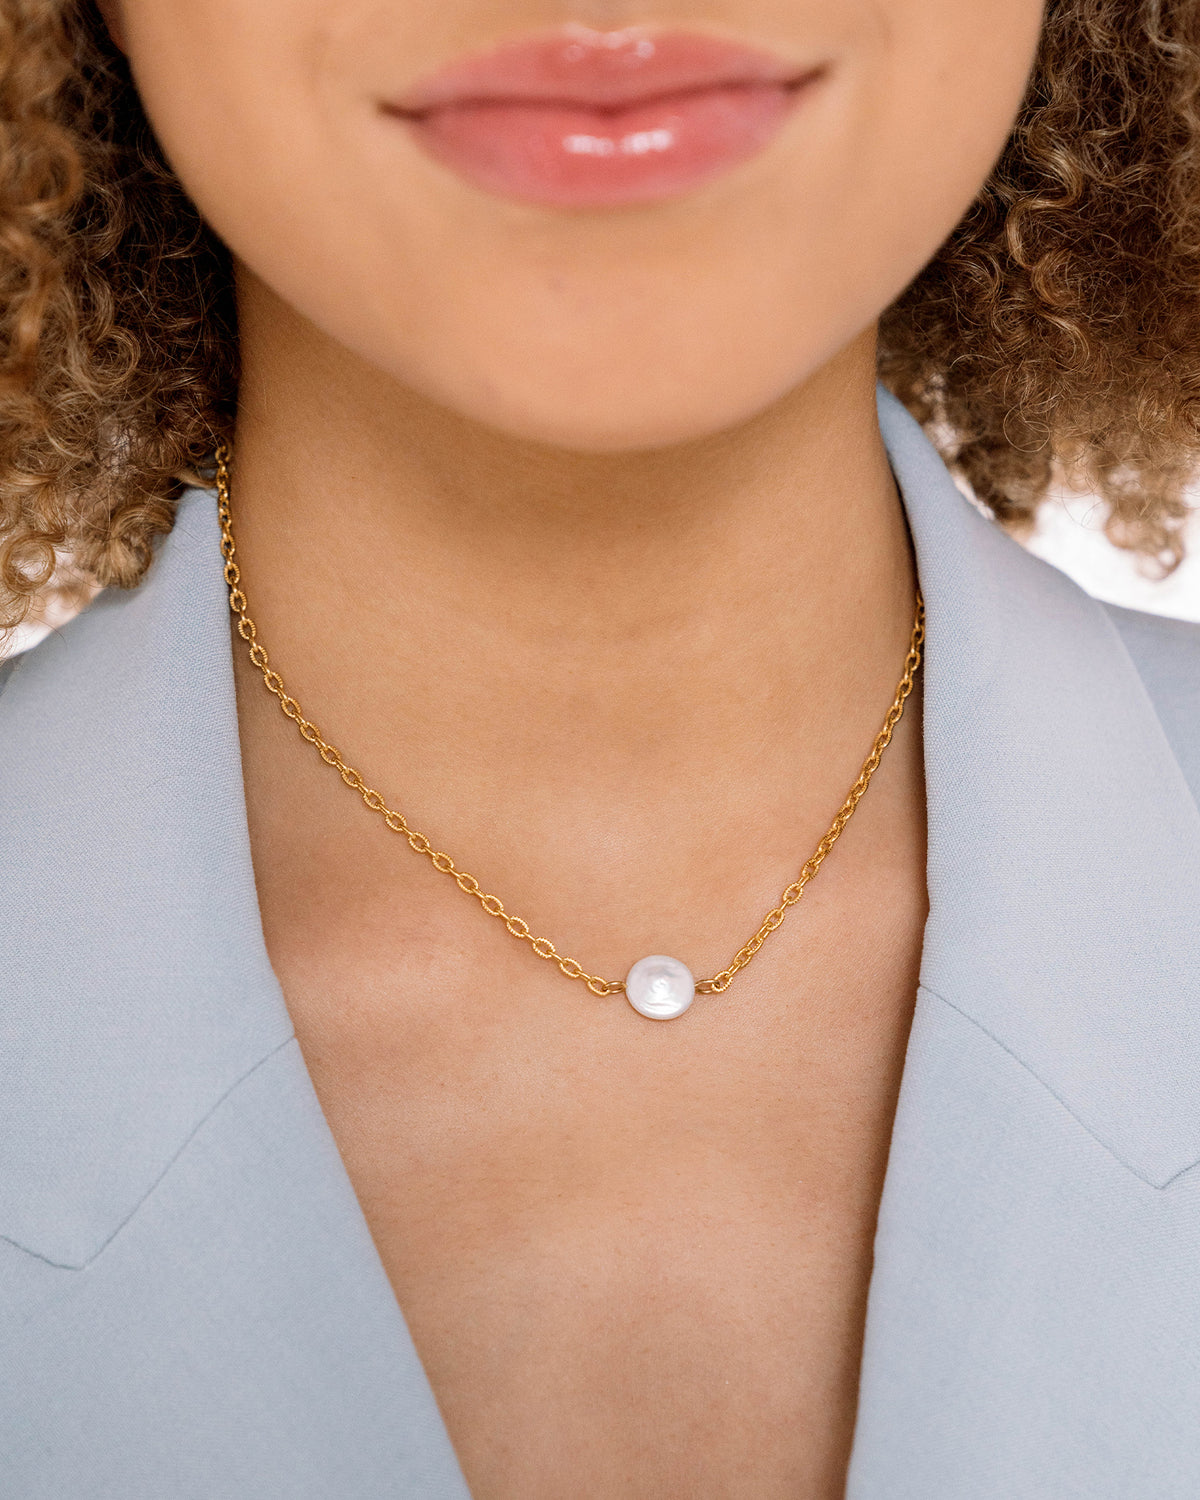 Pearl necklaces are winters most radical accessory | Girlfriend